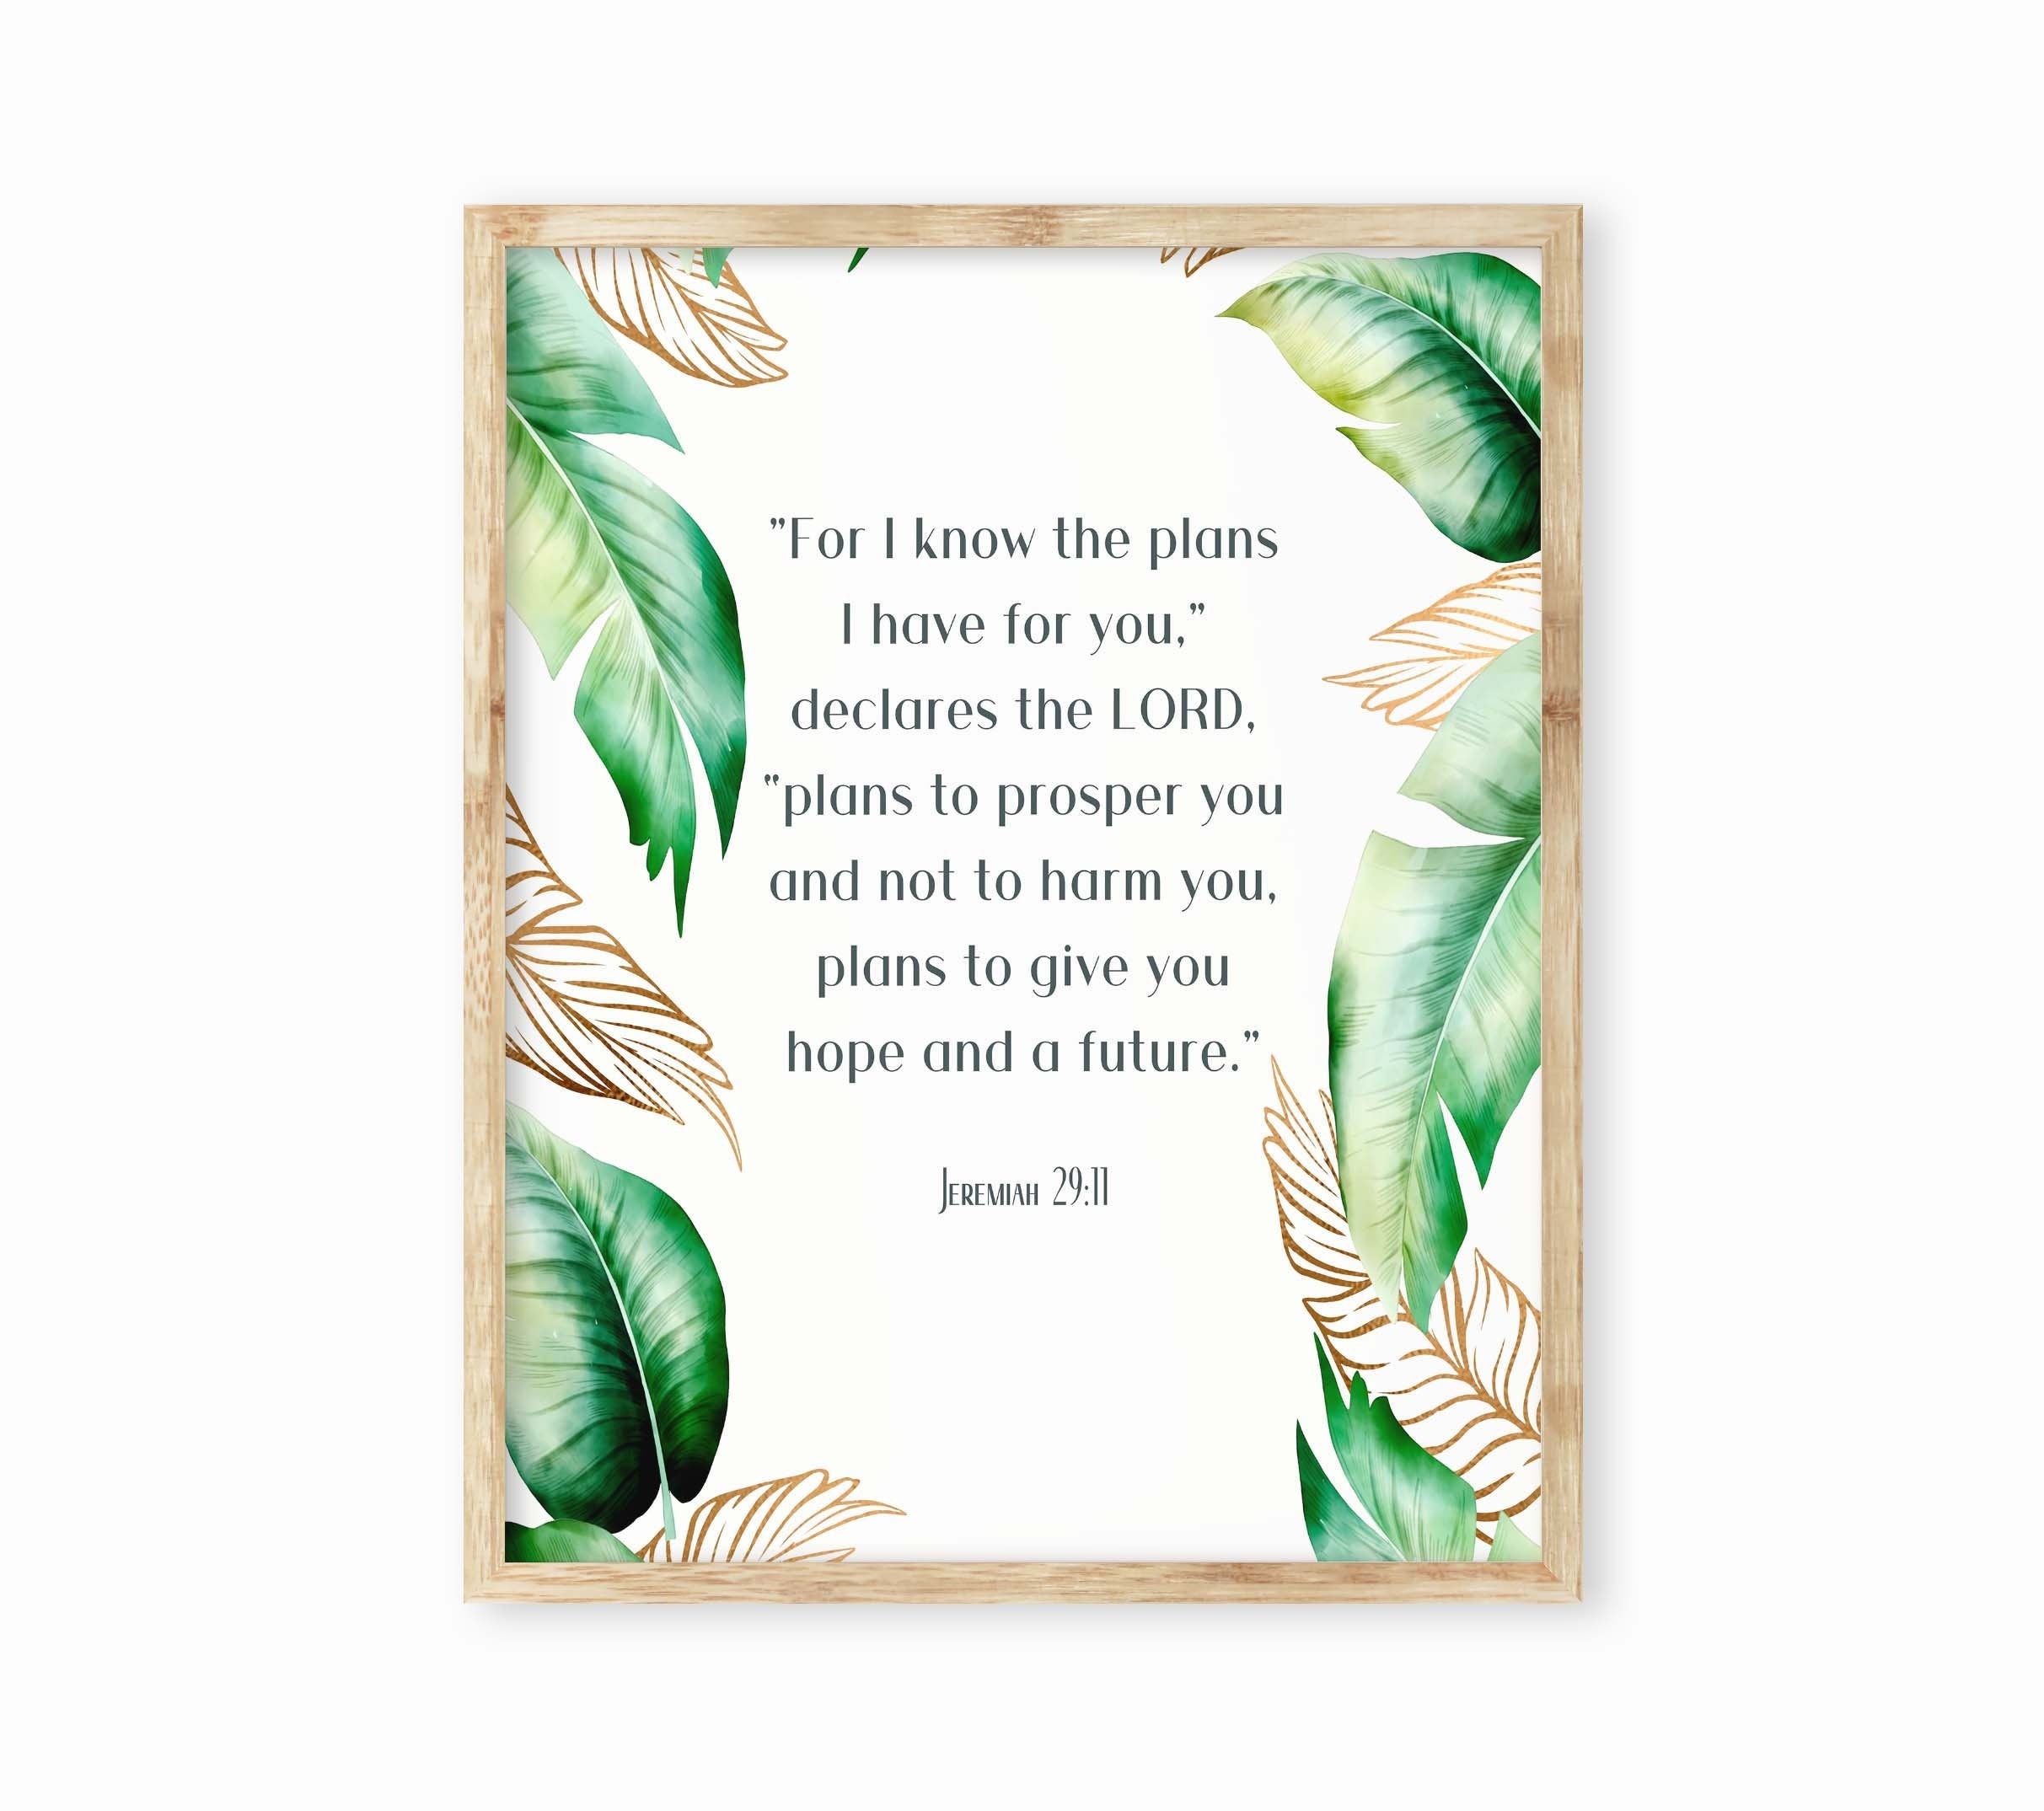 Give you Hope and a Future Jeremiah 29:11 Bible Verse Print, Inspirational Gift Wall Art Unframed